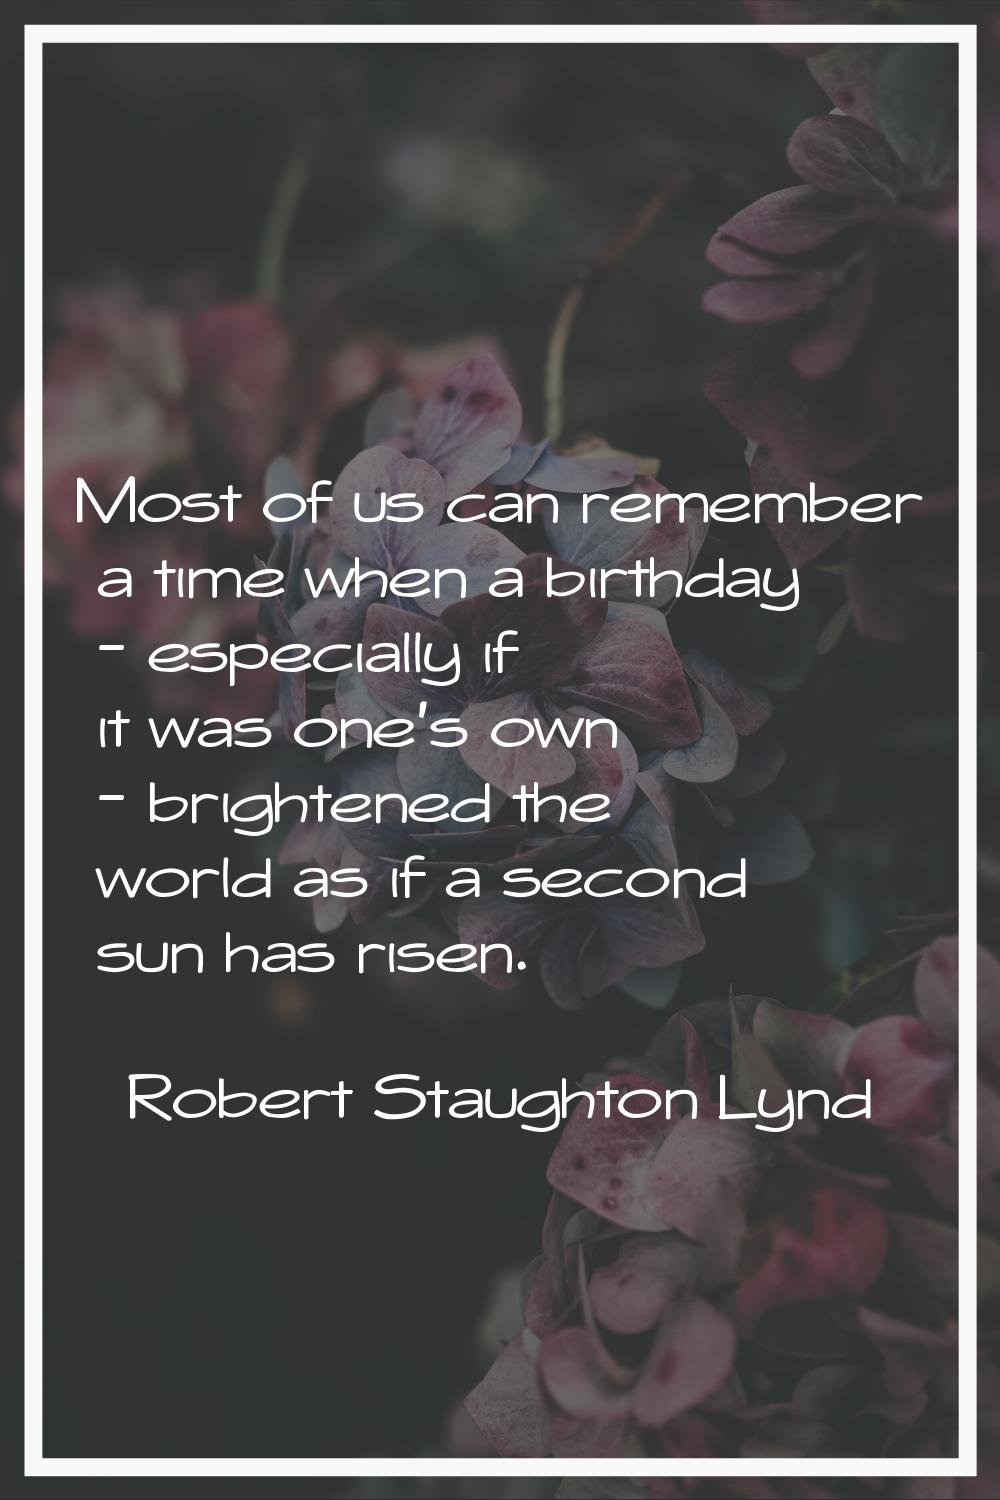 Most of us can remember a time when a birthday - especially if it was one's own - brightened the wo